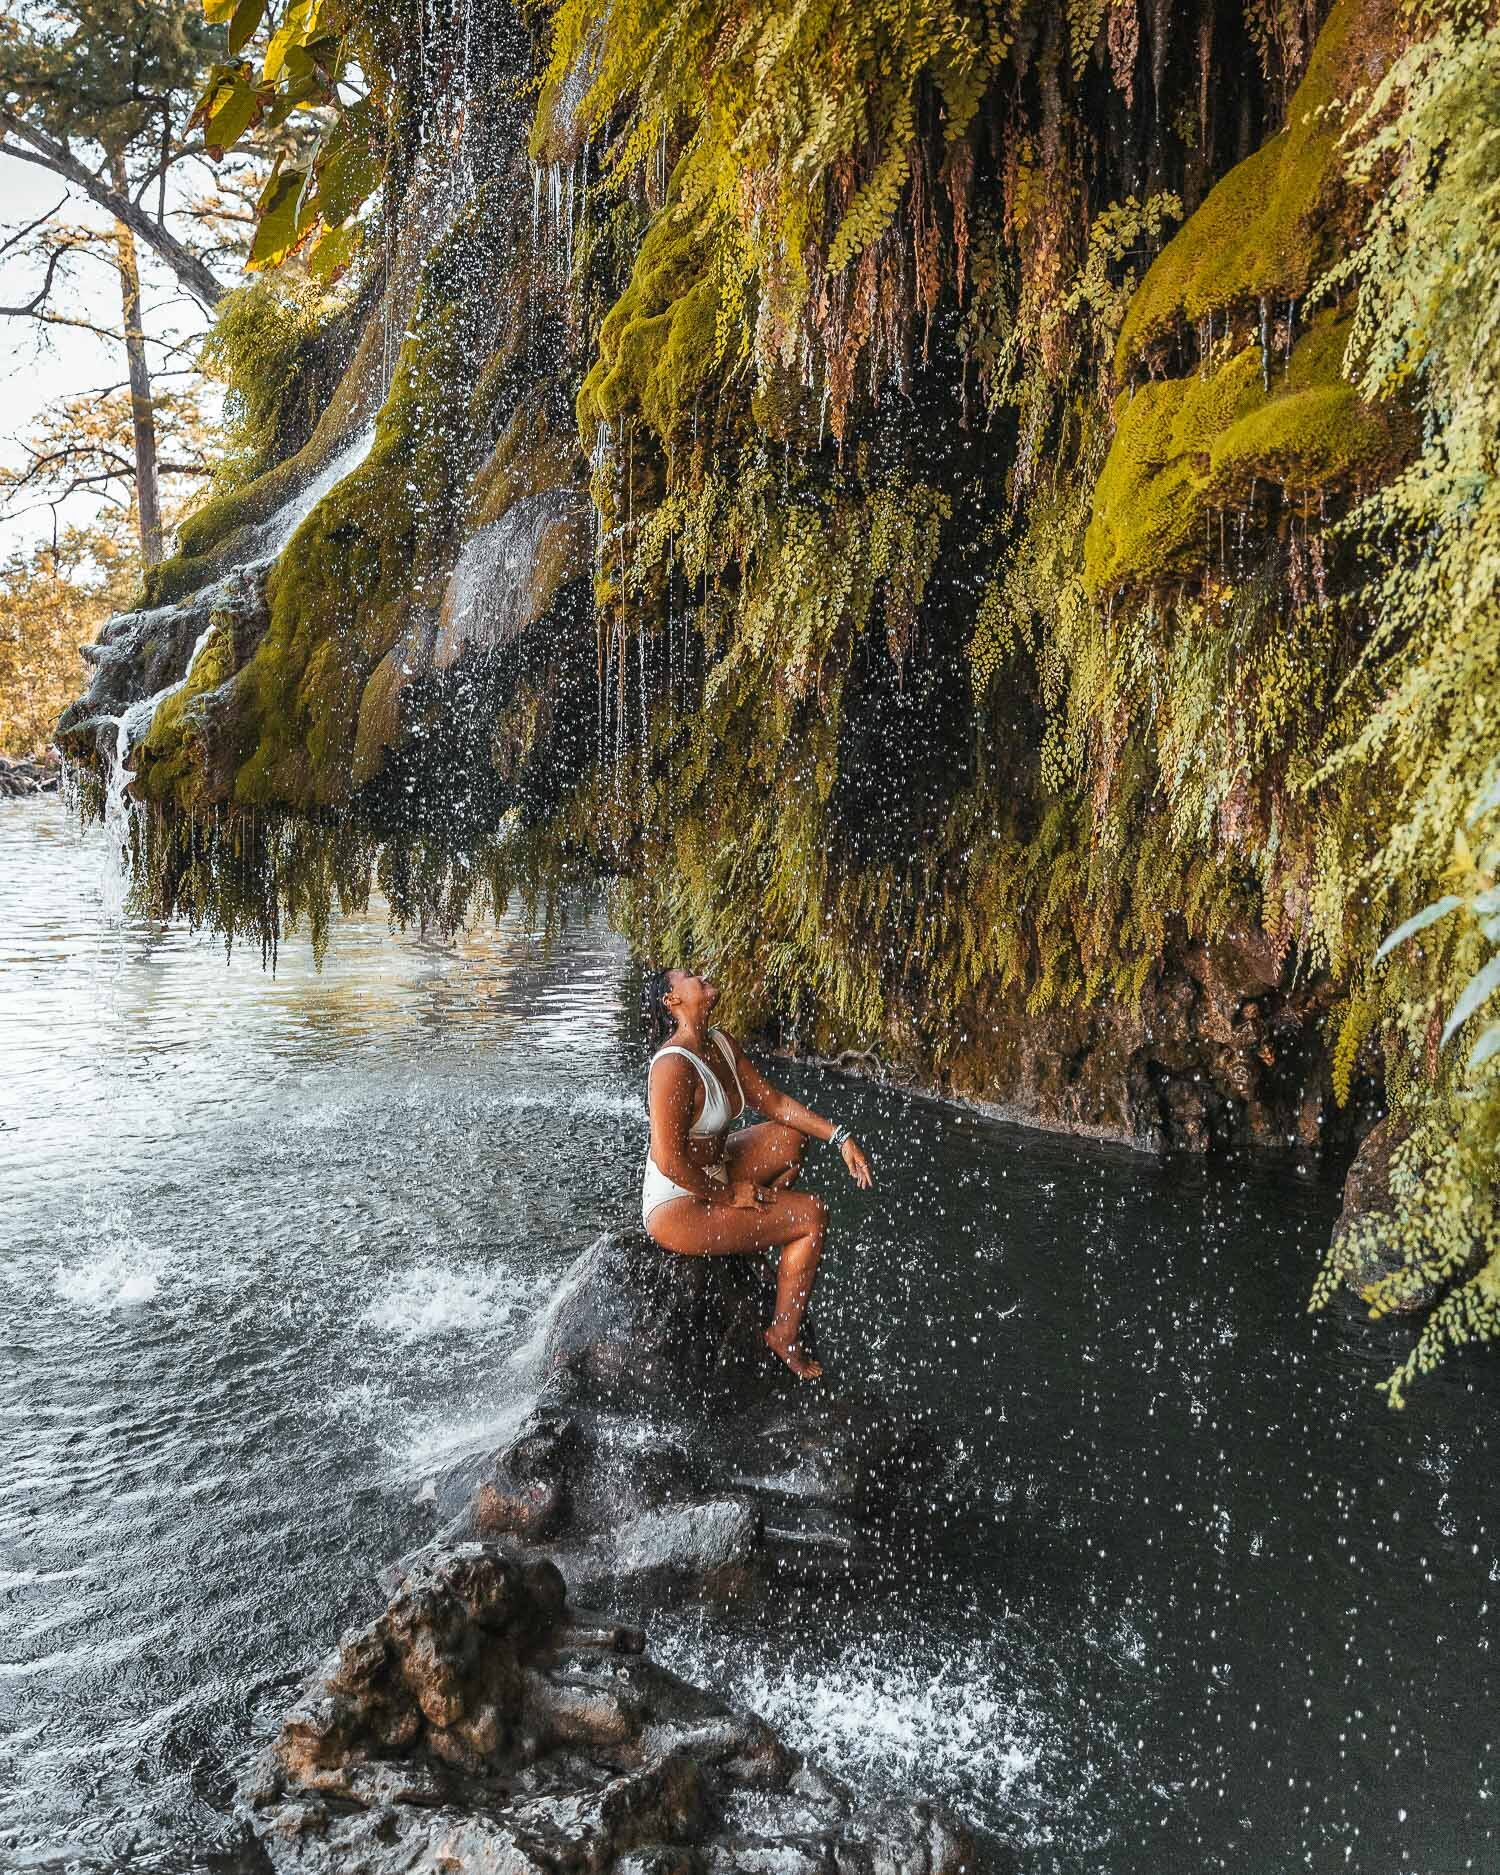 Krause Springs swimming hole // The Best Day Trips from Austin, Texas #atx #travel #texas #roadtrip